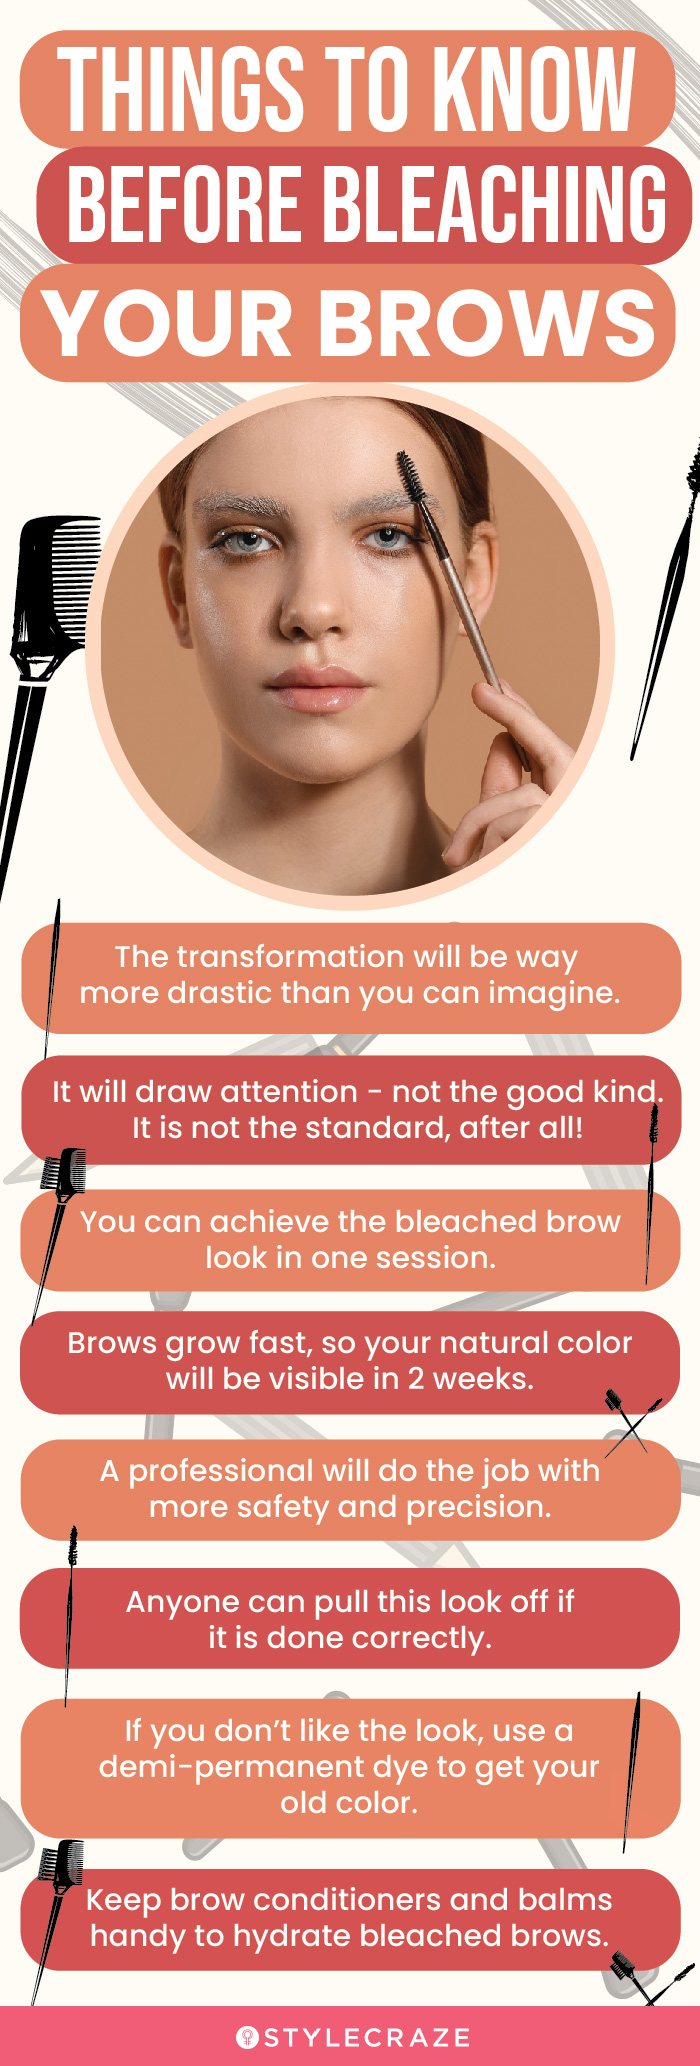 things to know before bleaching your brows [infographic]